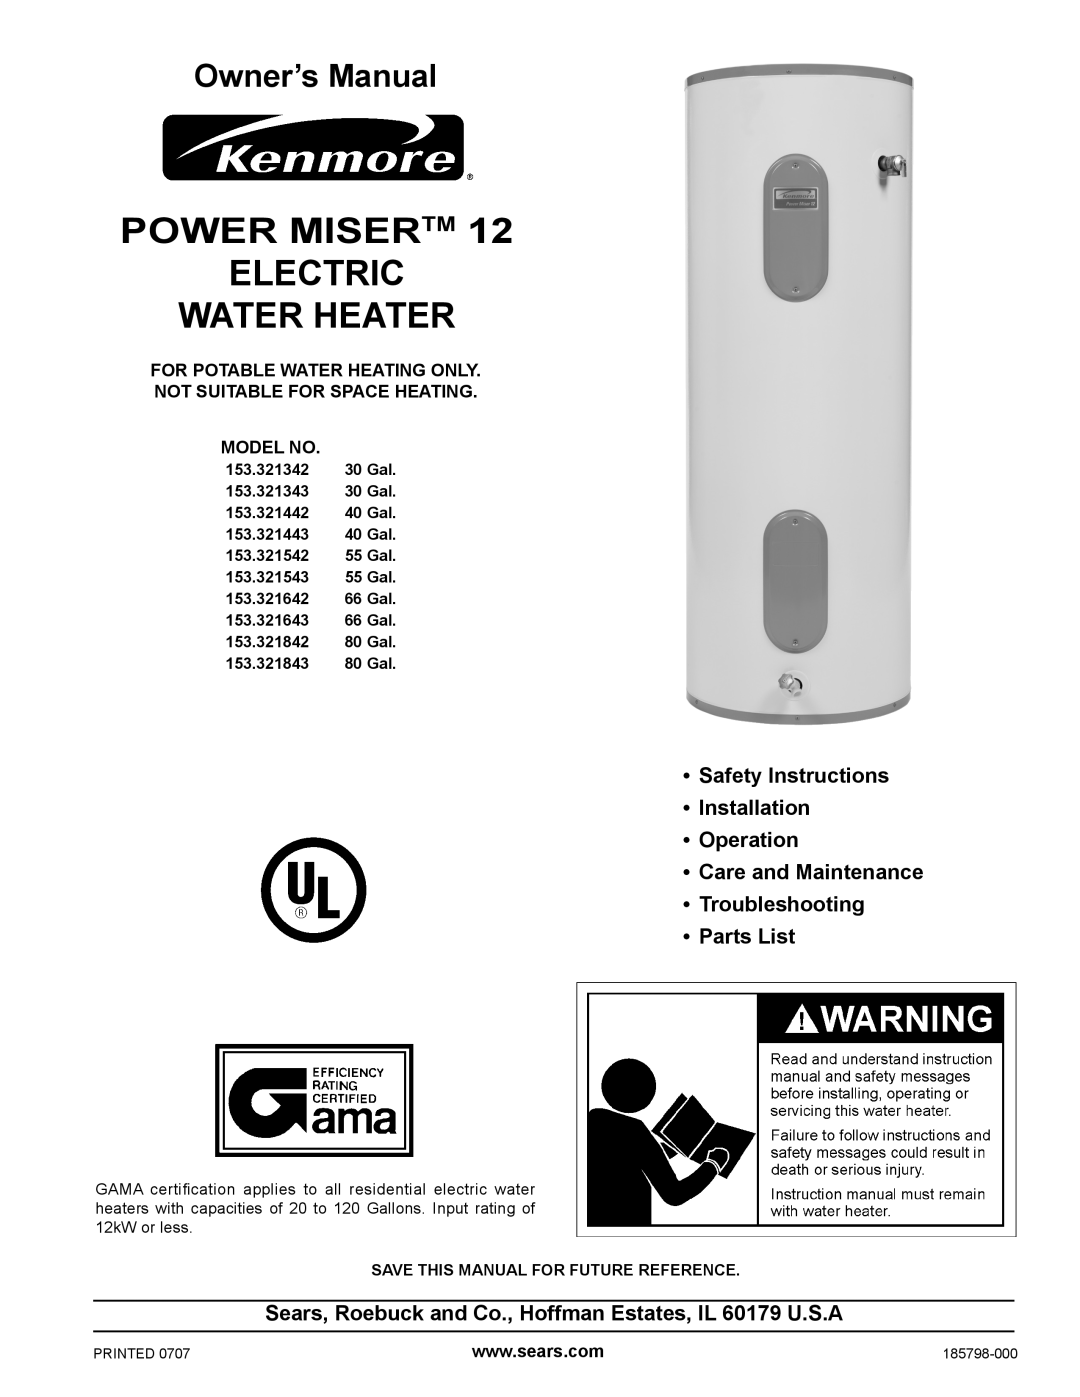 Kenmore 336801 HA, 336901 HA, 761, 153.336361, 153.336301 HA owner manual For Your Safety, Power Miser Tm Gas Water Heater 